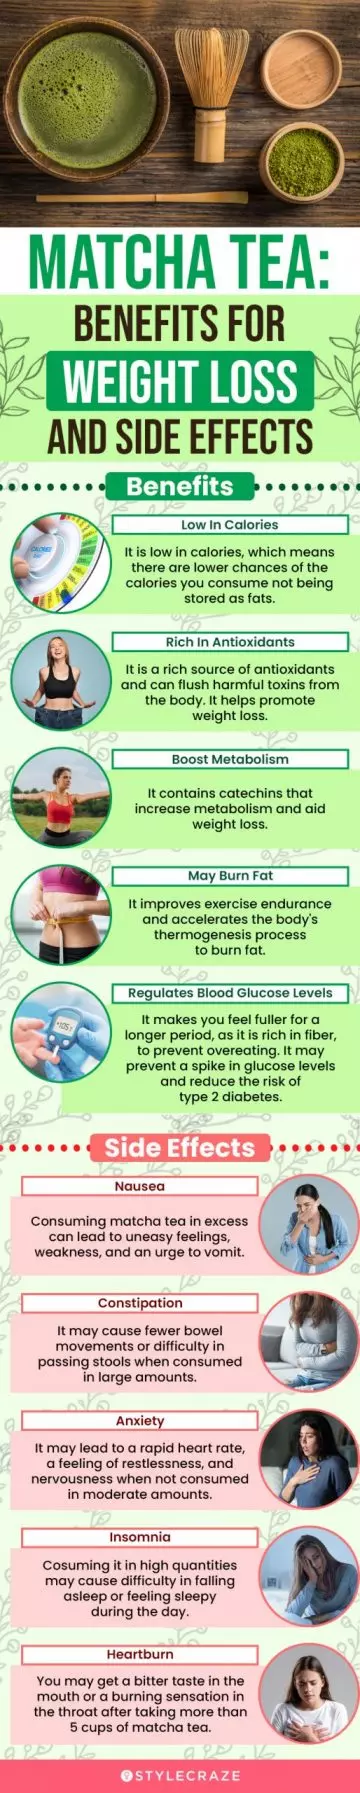 matcha tea benefits for weight loss and side effects (infographic)